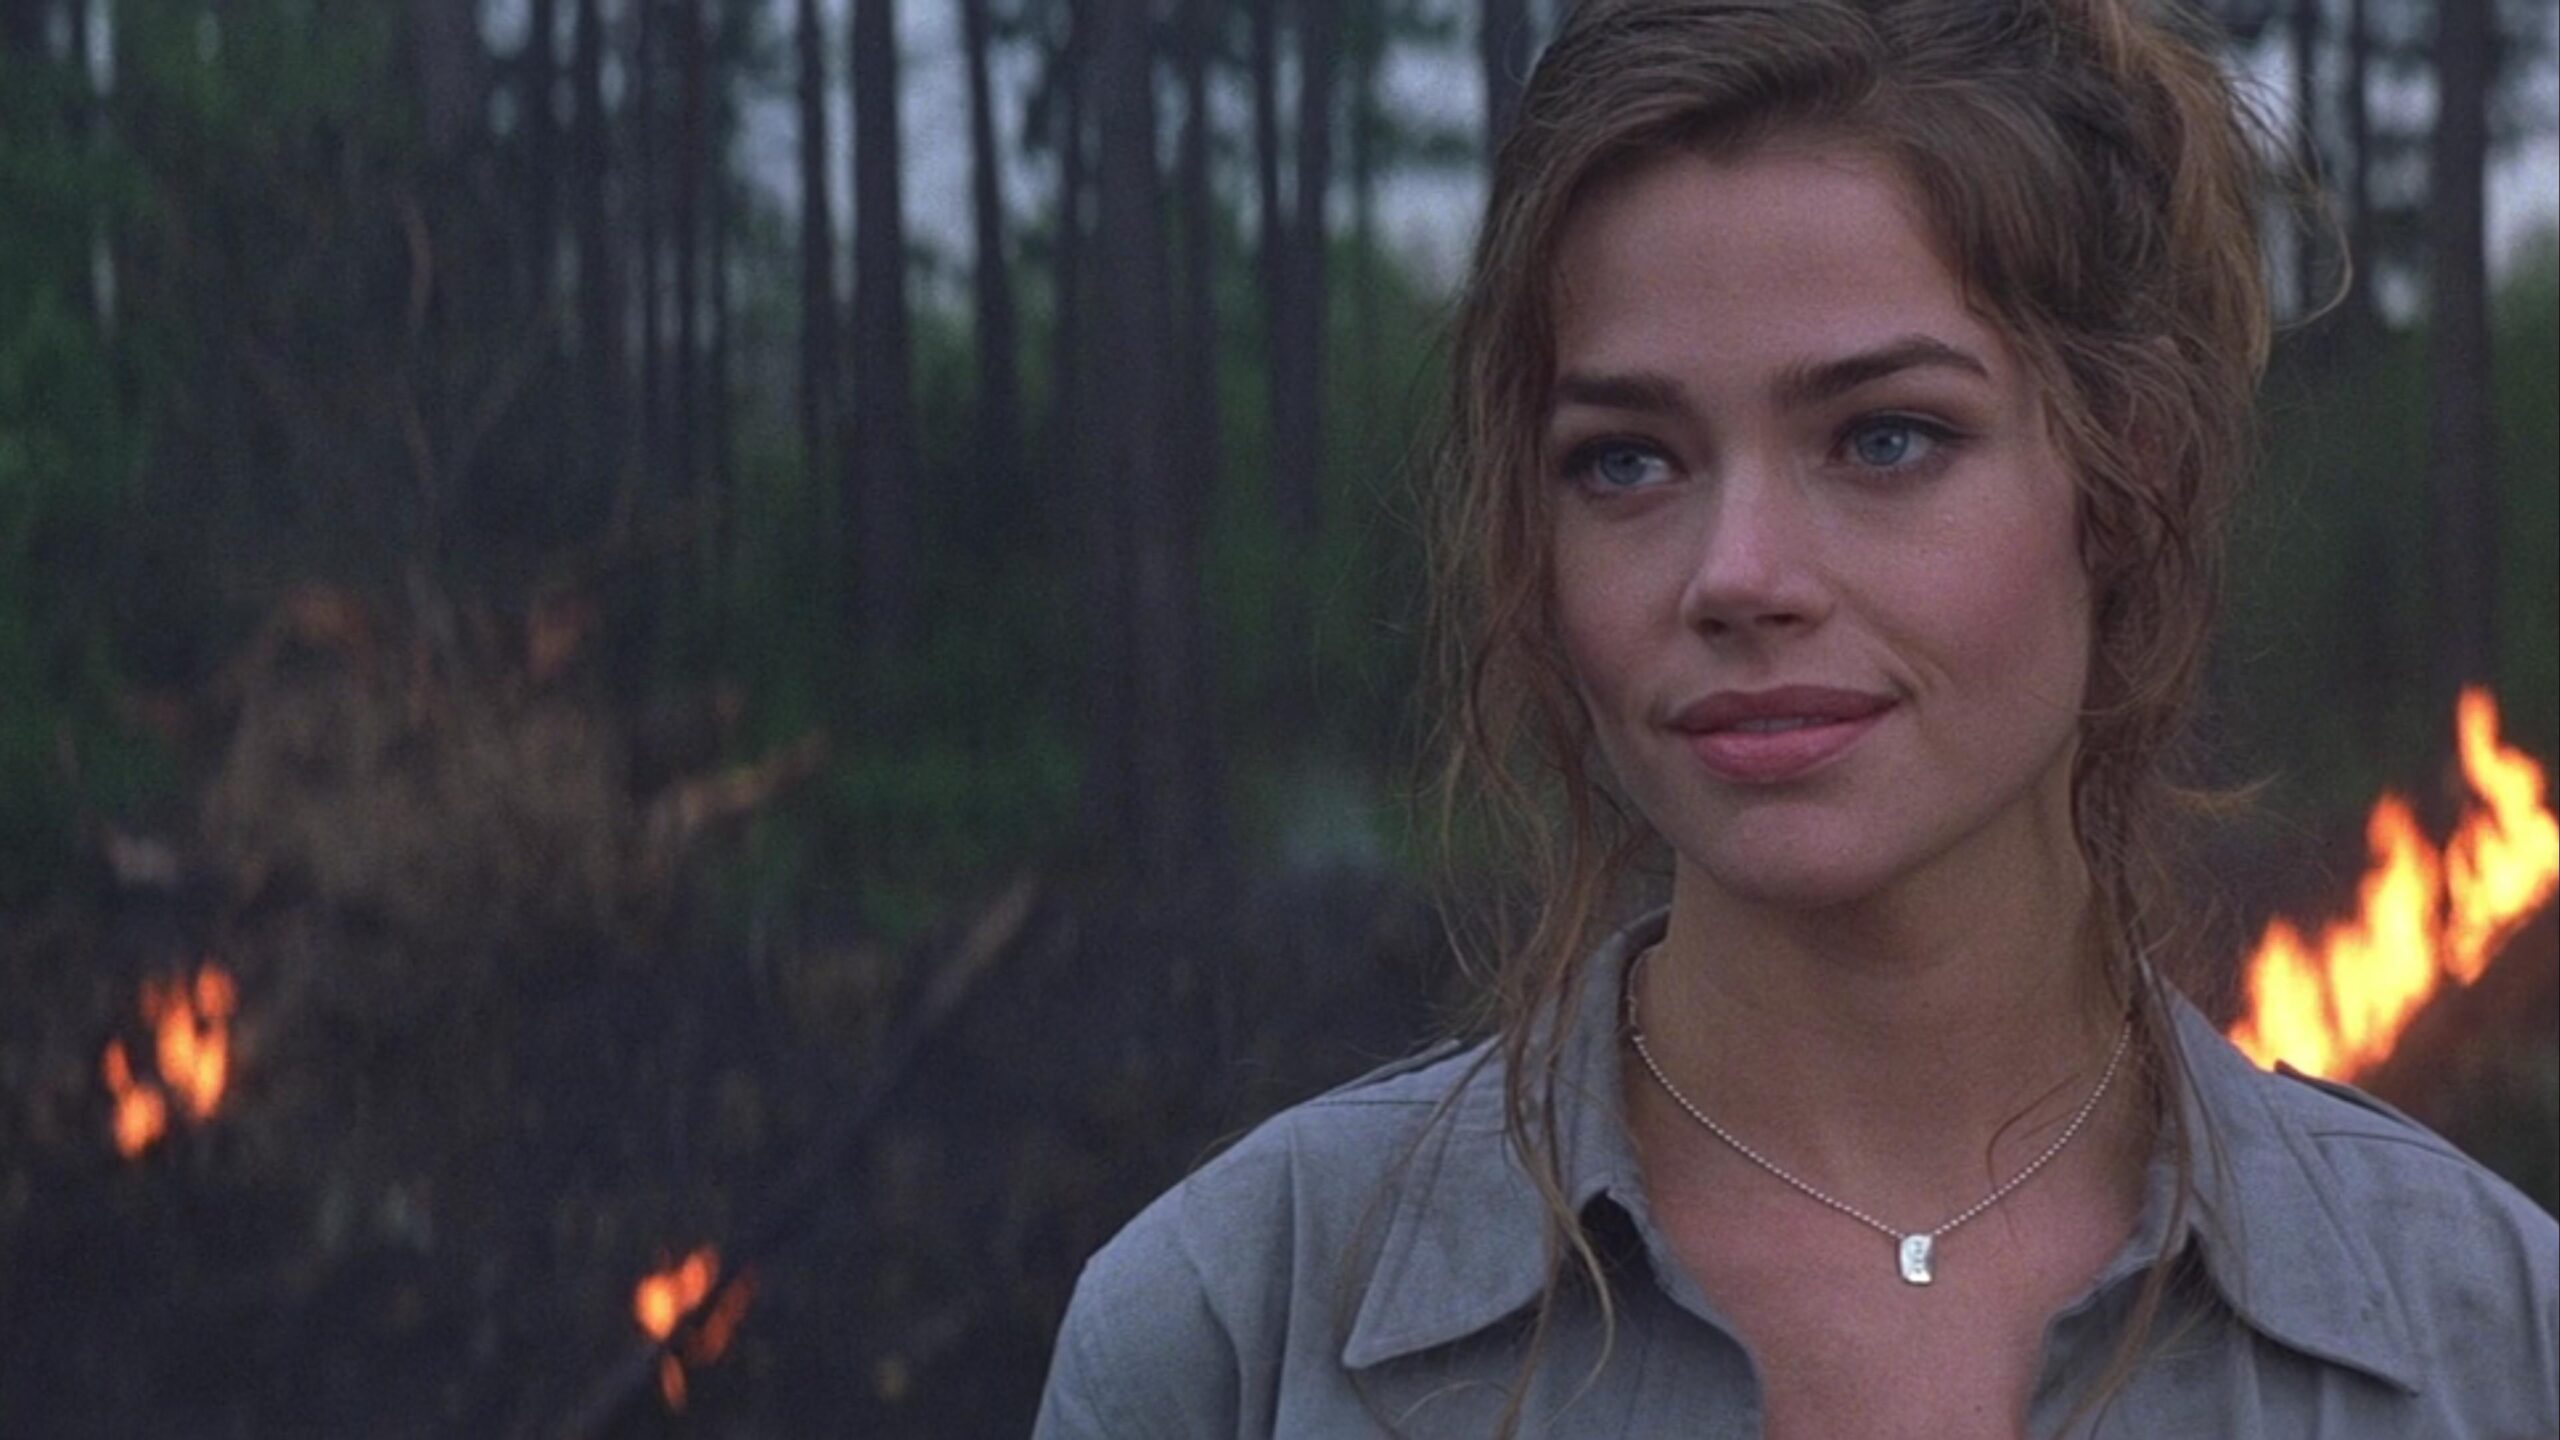 denise richards the world is not enough